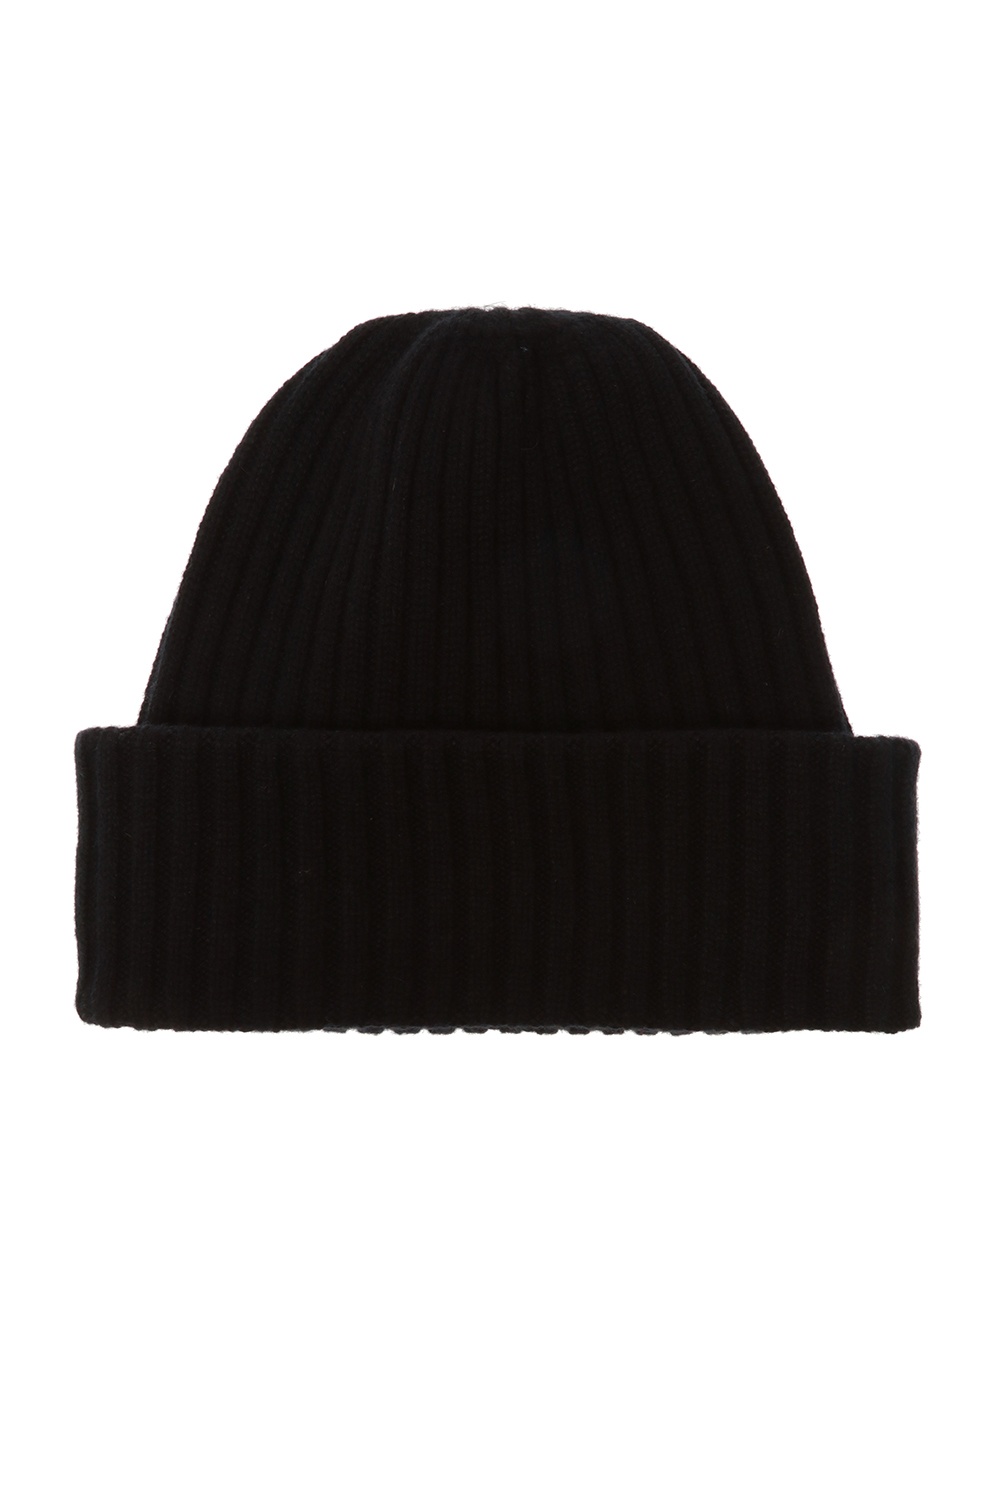 burberry cashmere hat